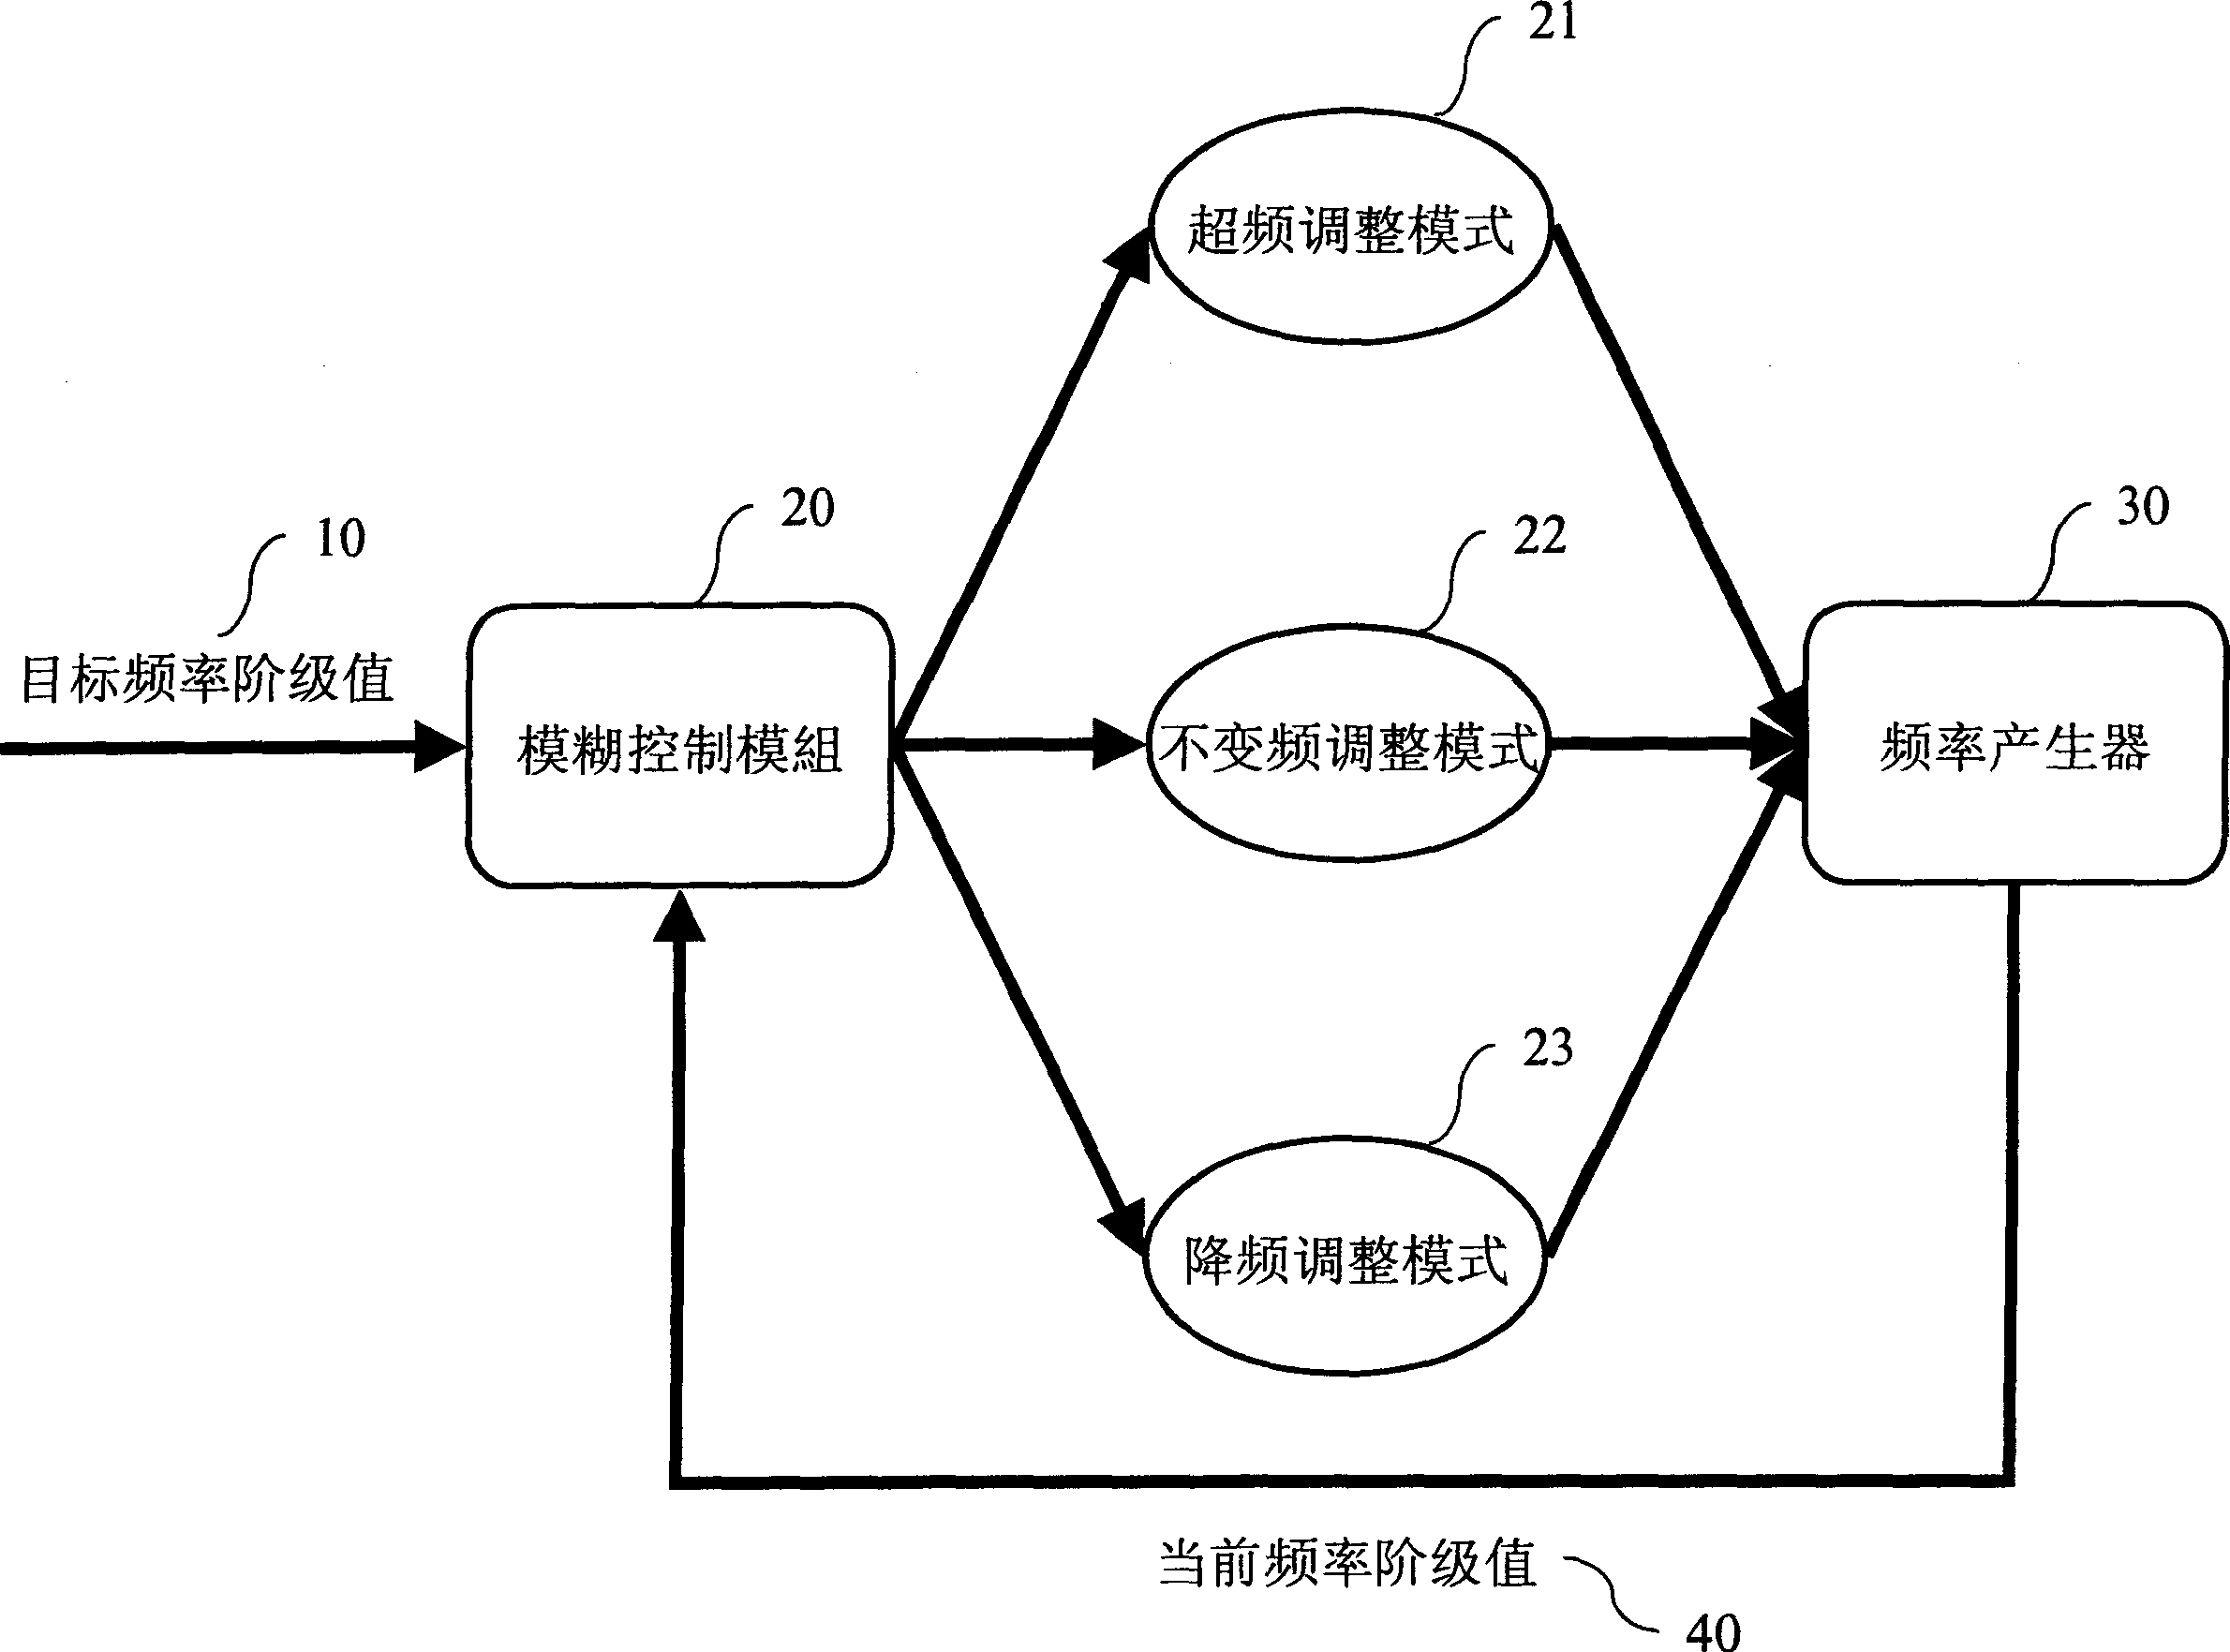 Method for adjusting working frequency of CPU